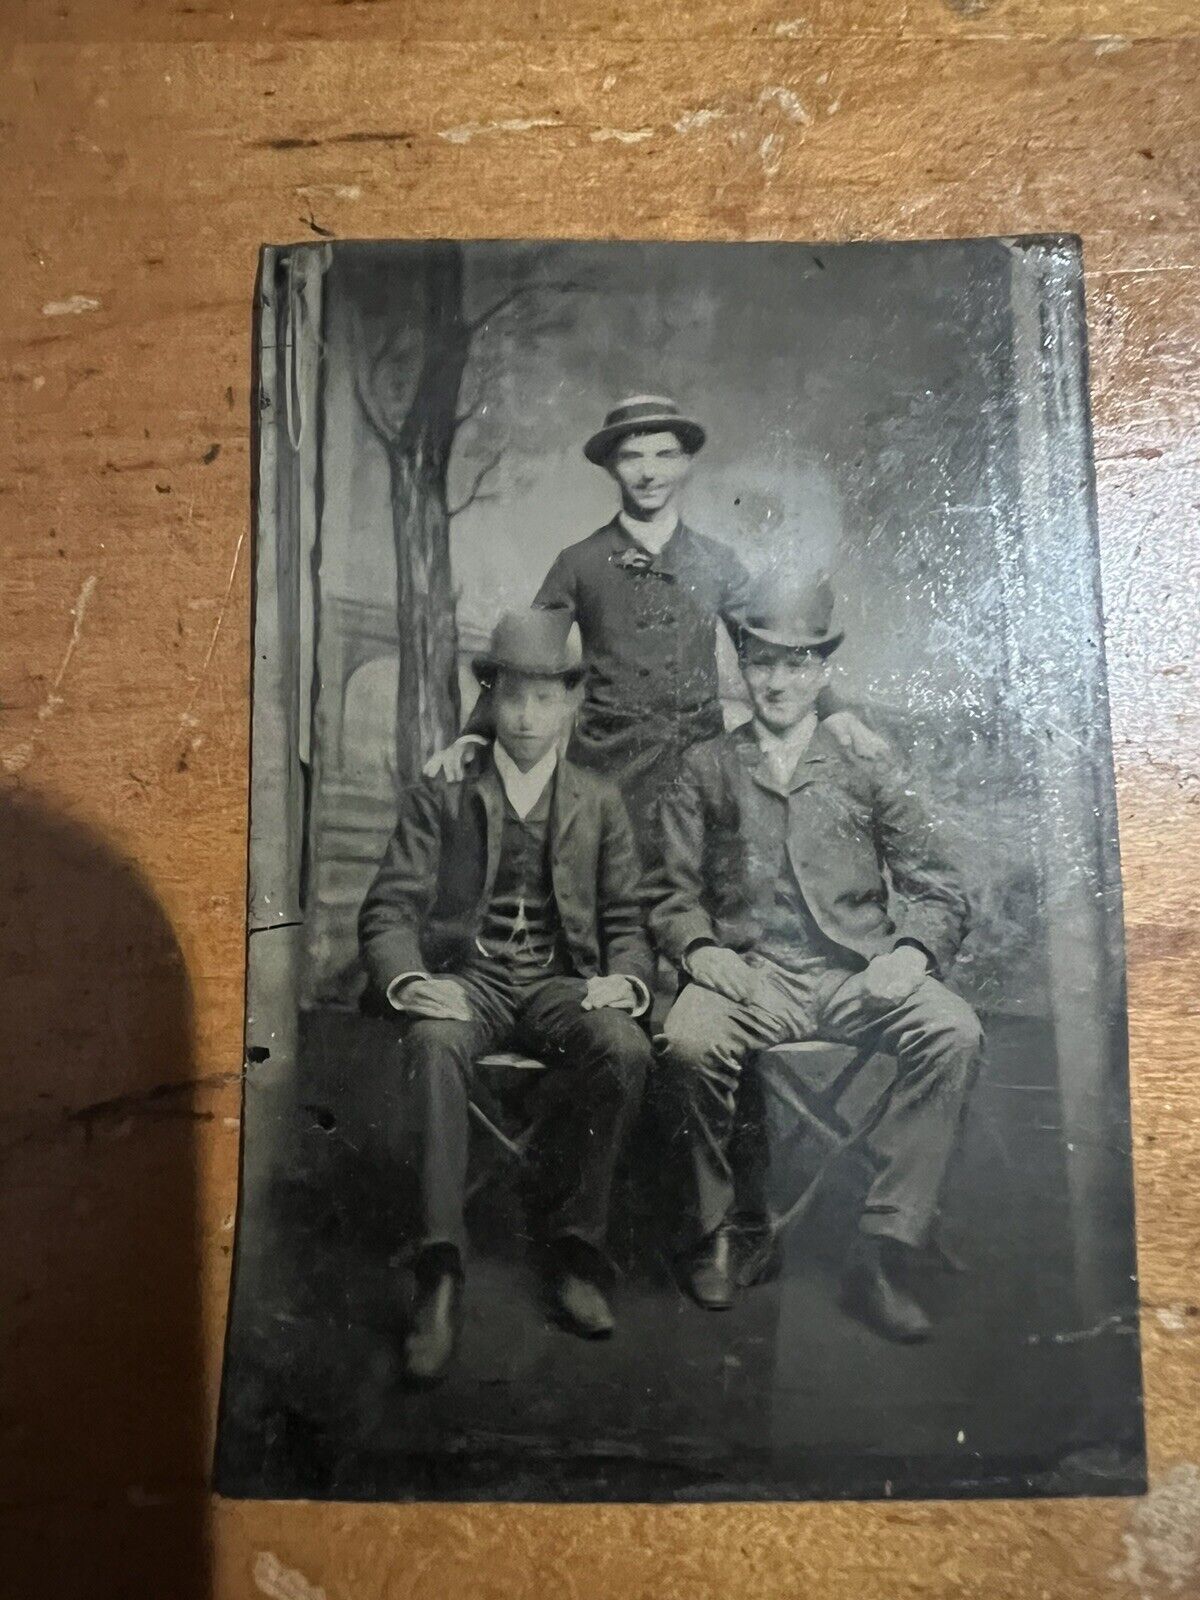 Vintage Tintype 1800”s 3 Men 3.5 Inch By 2.5 Inch